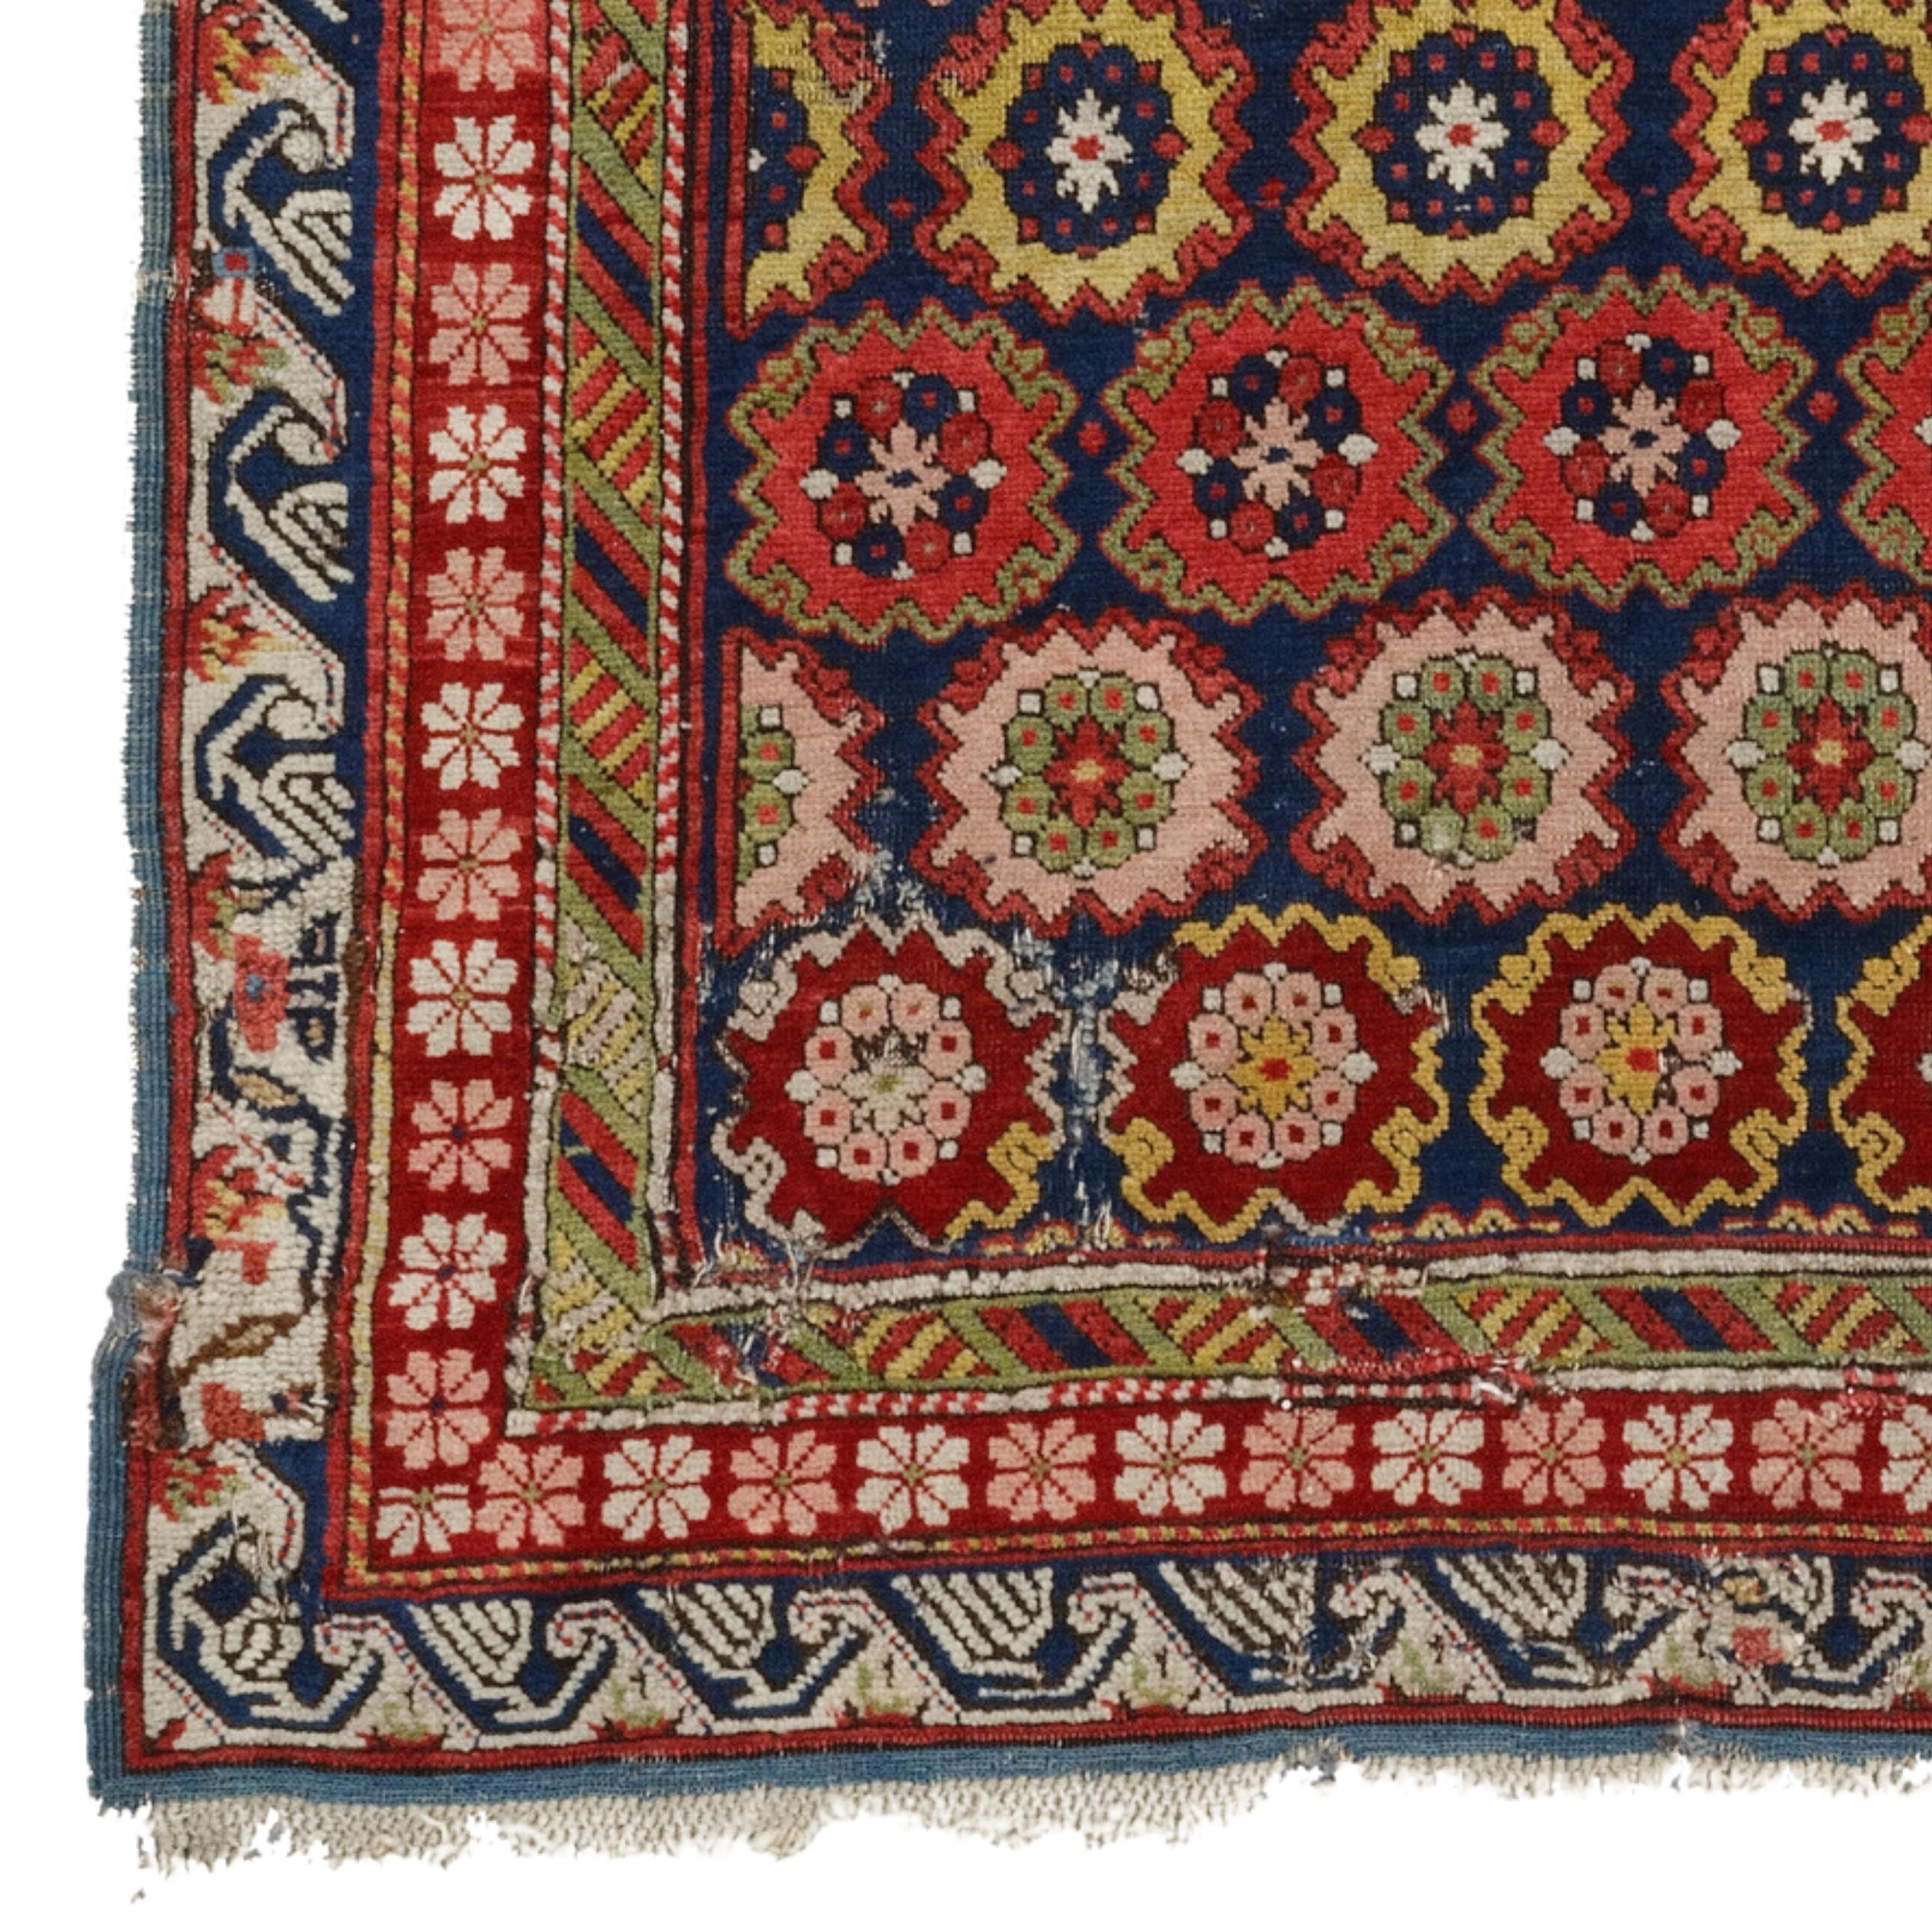 Antique Kuba Shirvan Rug
Late Of The 19th Century Caucasian Shirvan Rug. in Good Condition.
Size 110 x 180 cm (43,3x70,8 In)

The Shirvan carpet is a handmade floor covering in the Shirvan region of Azerbaijan in the Southeastern Caucasus.

Many of